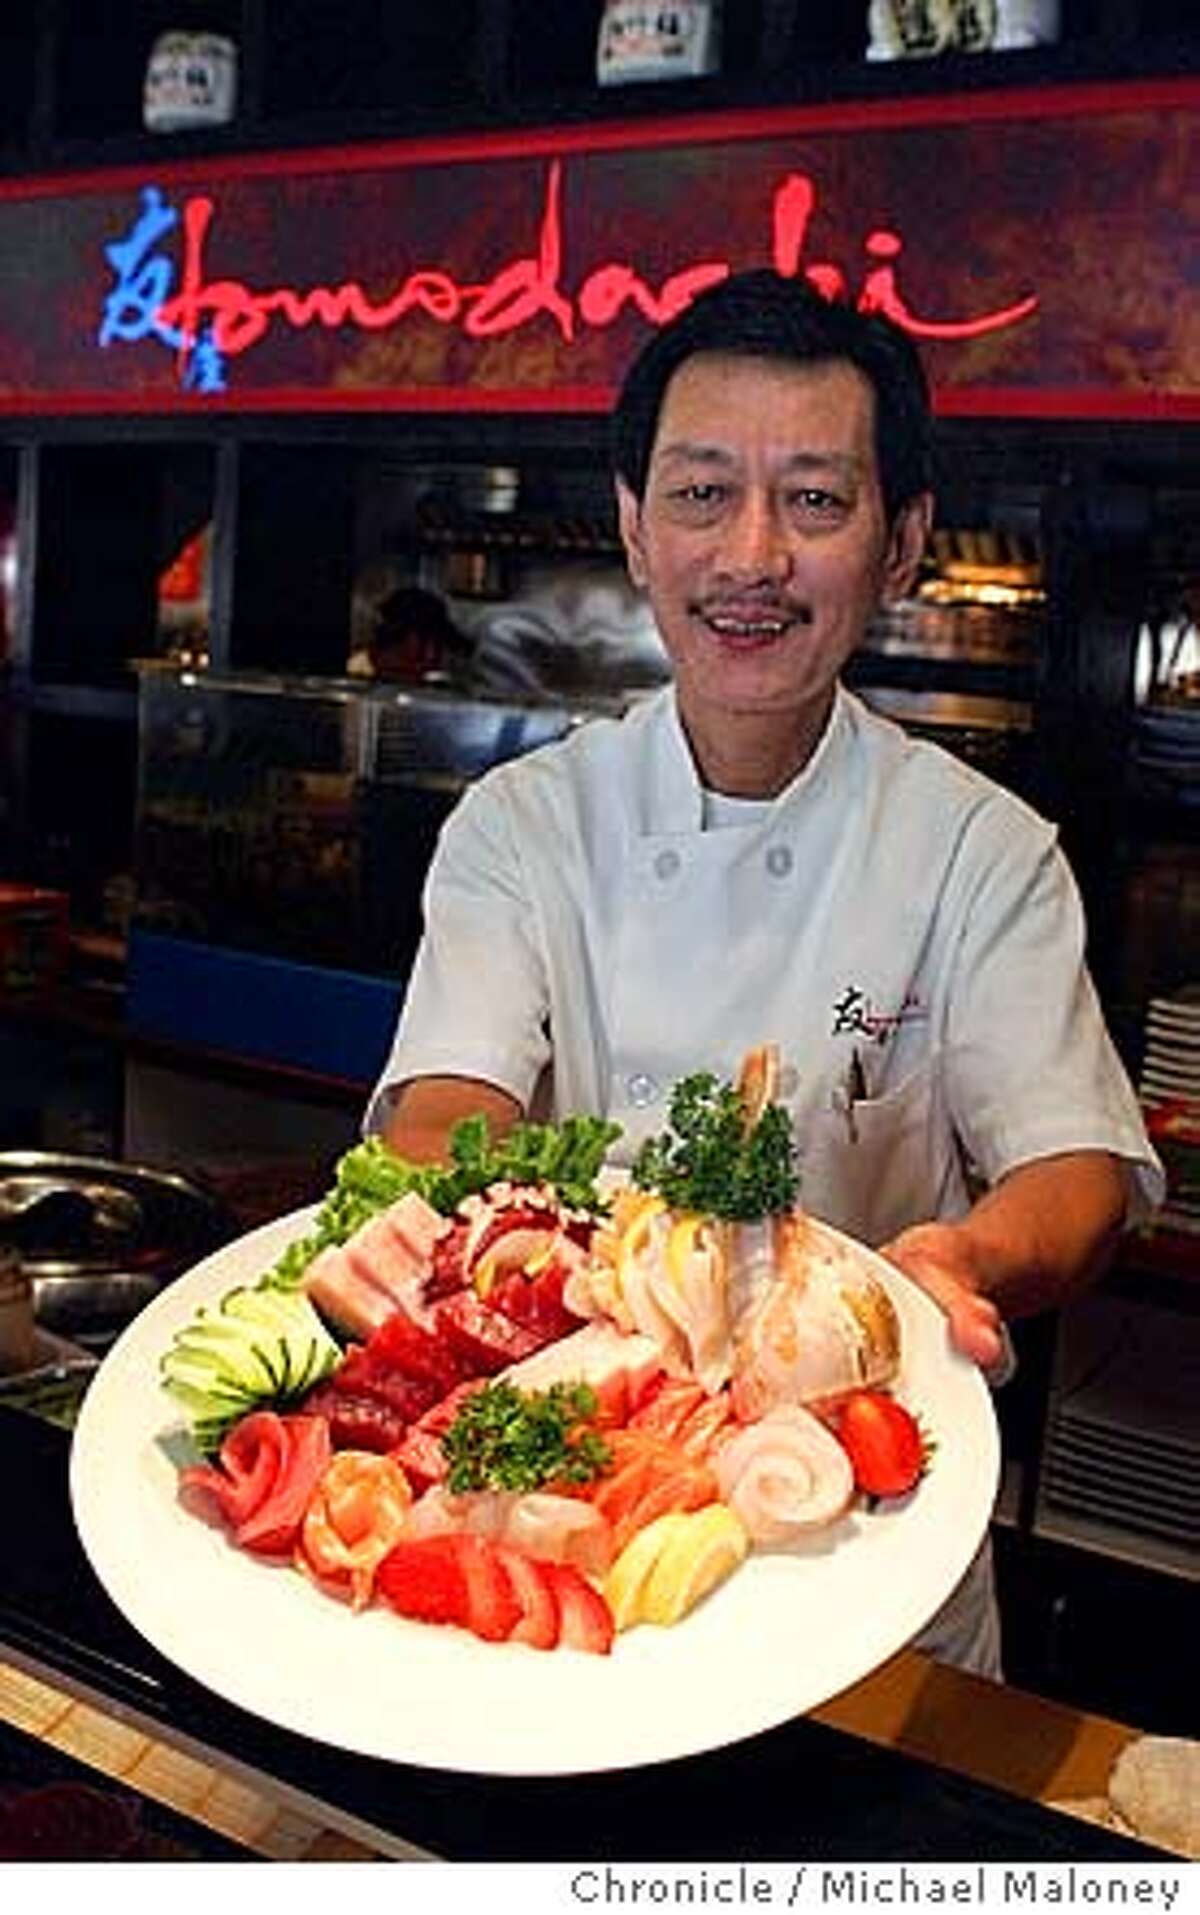 Chef James Loo displays his artistic talent with this sashimi plate. Tomodachi Sushi Bistro 24123 Hesperian Blvd. (at Winton) IN HAYWARD Photo by Michael Maloney / San Francisco Chronicle